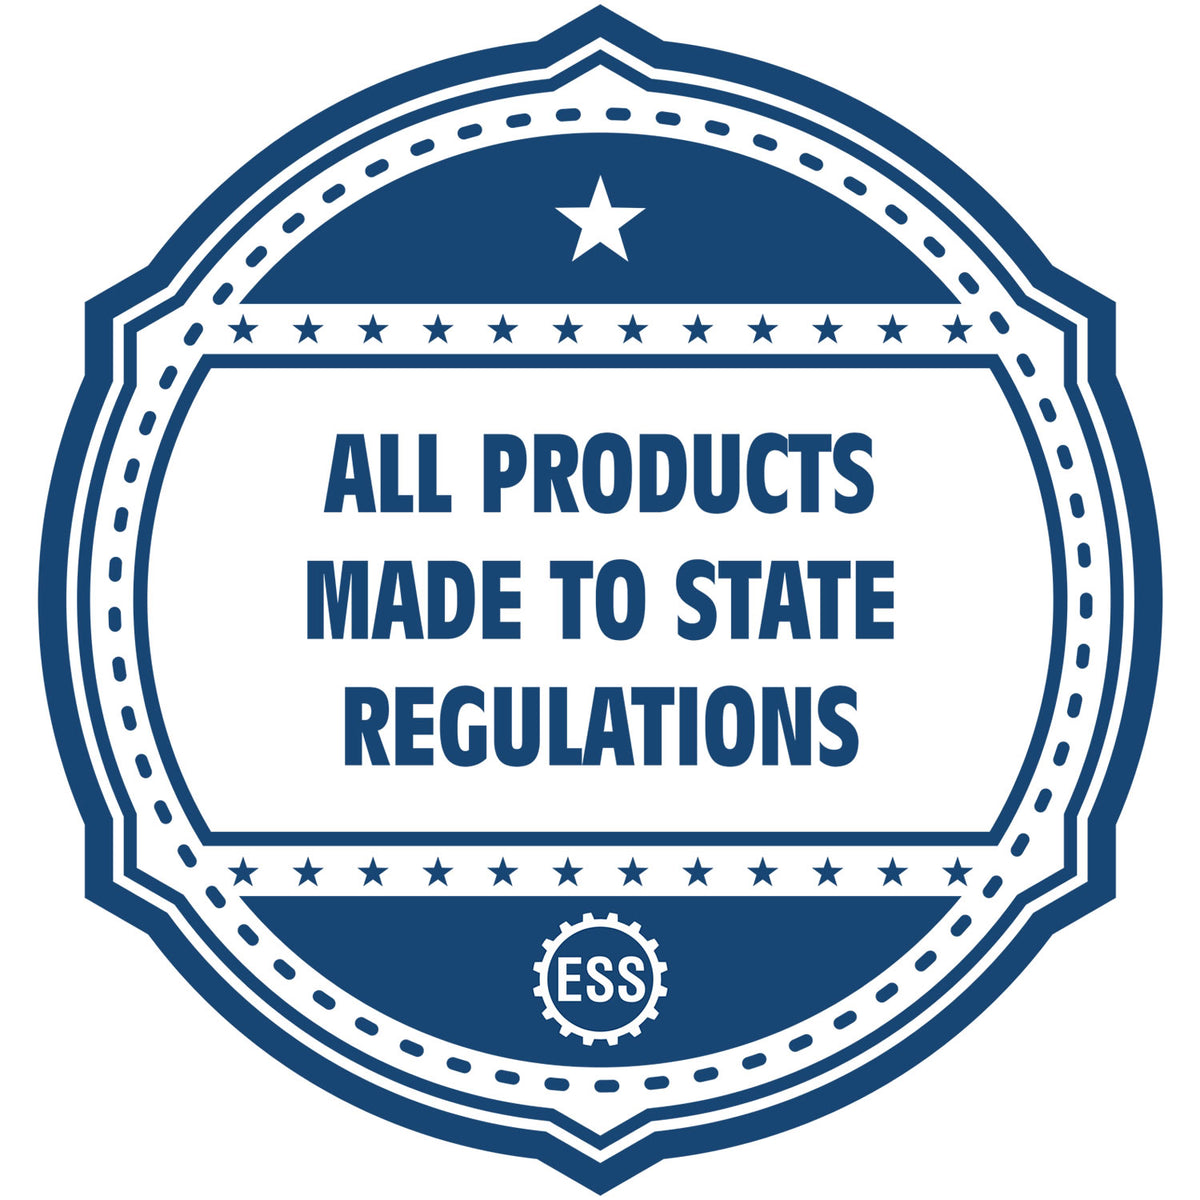 An icon or badge element for the Wooden Handle Wisconsin State Seal Notary Public Stamp showing that this product is made in compliance with state regulations.